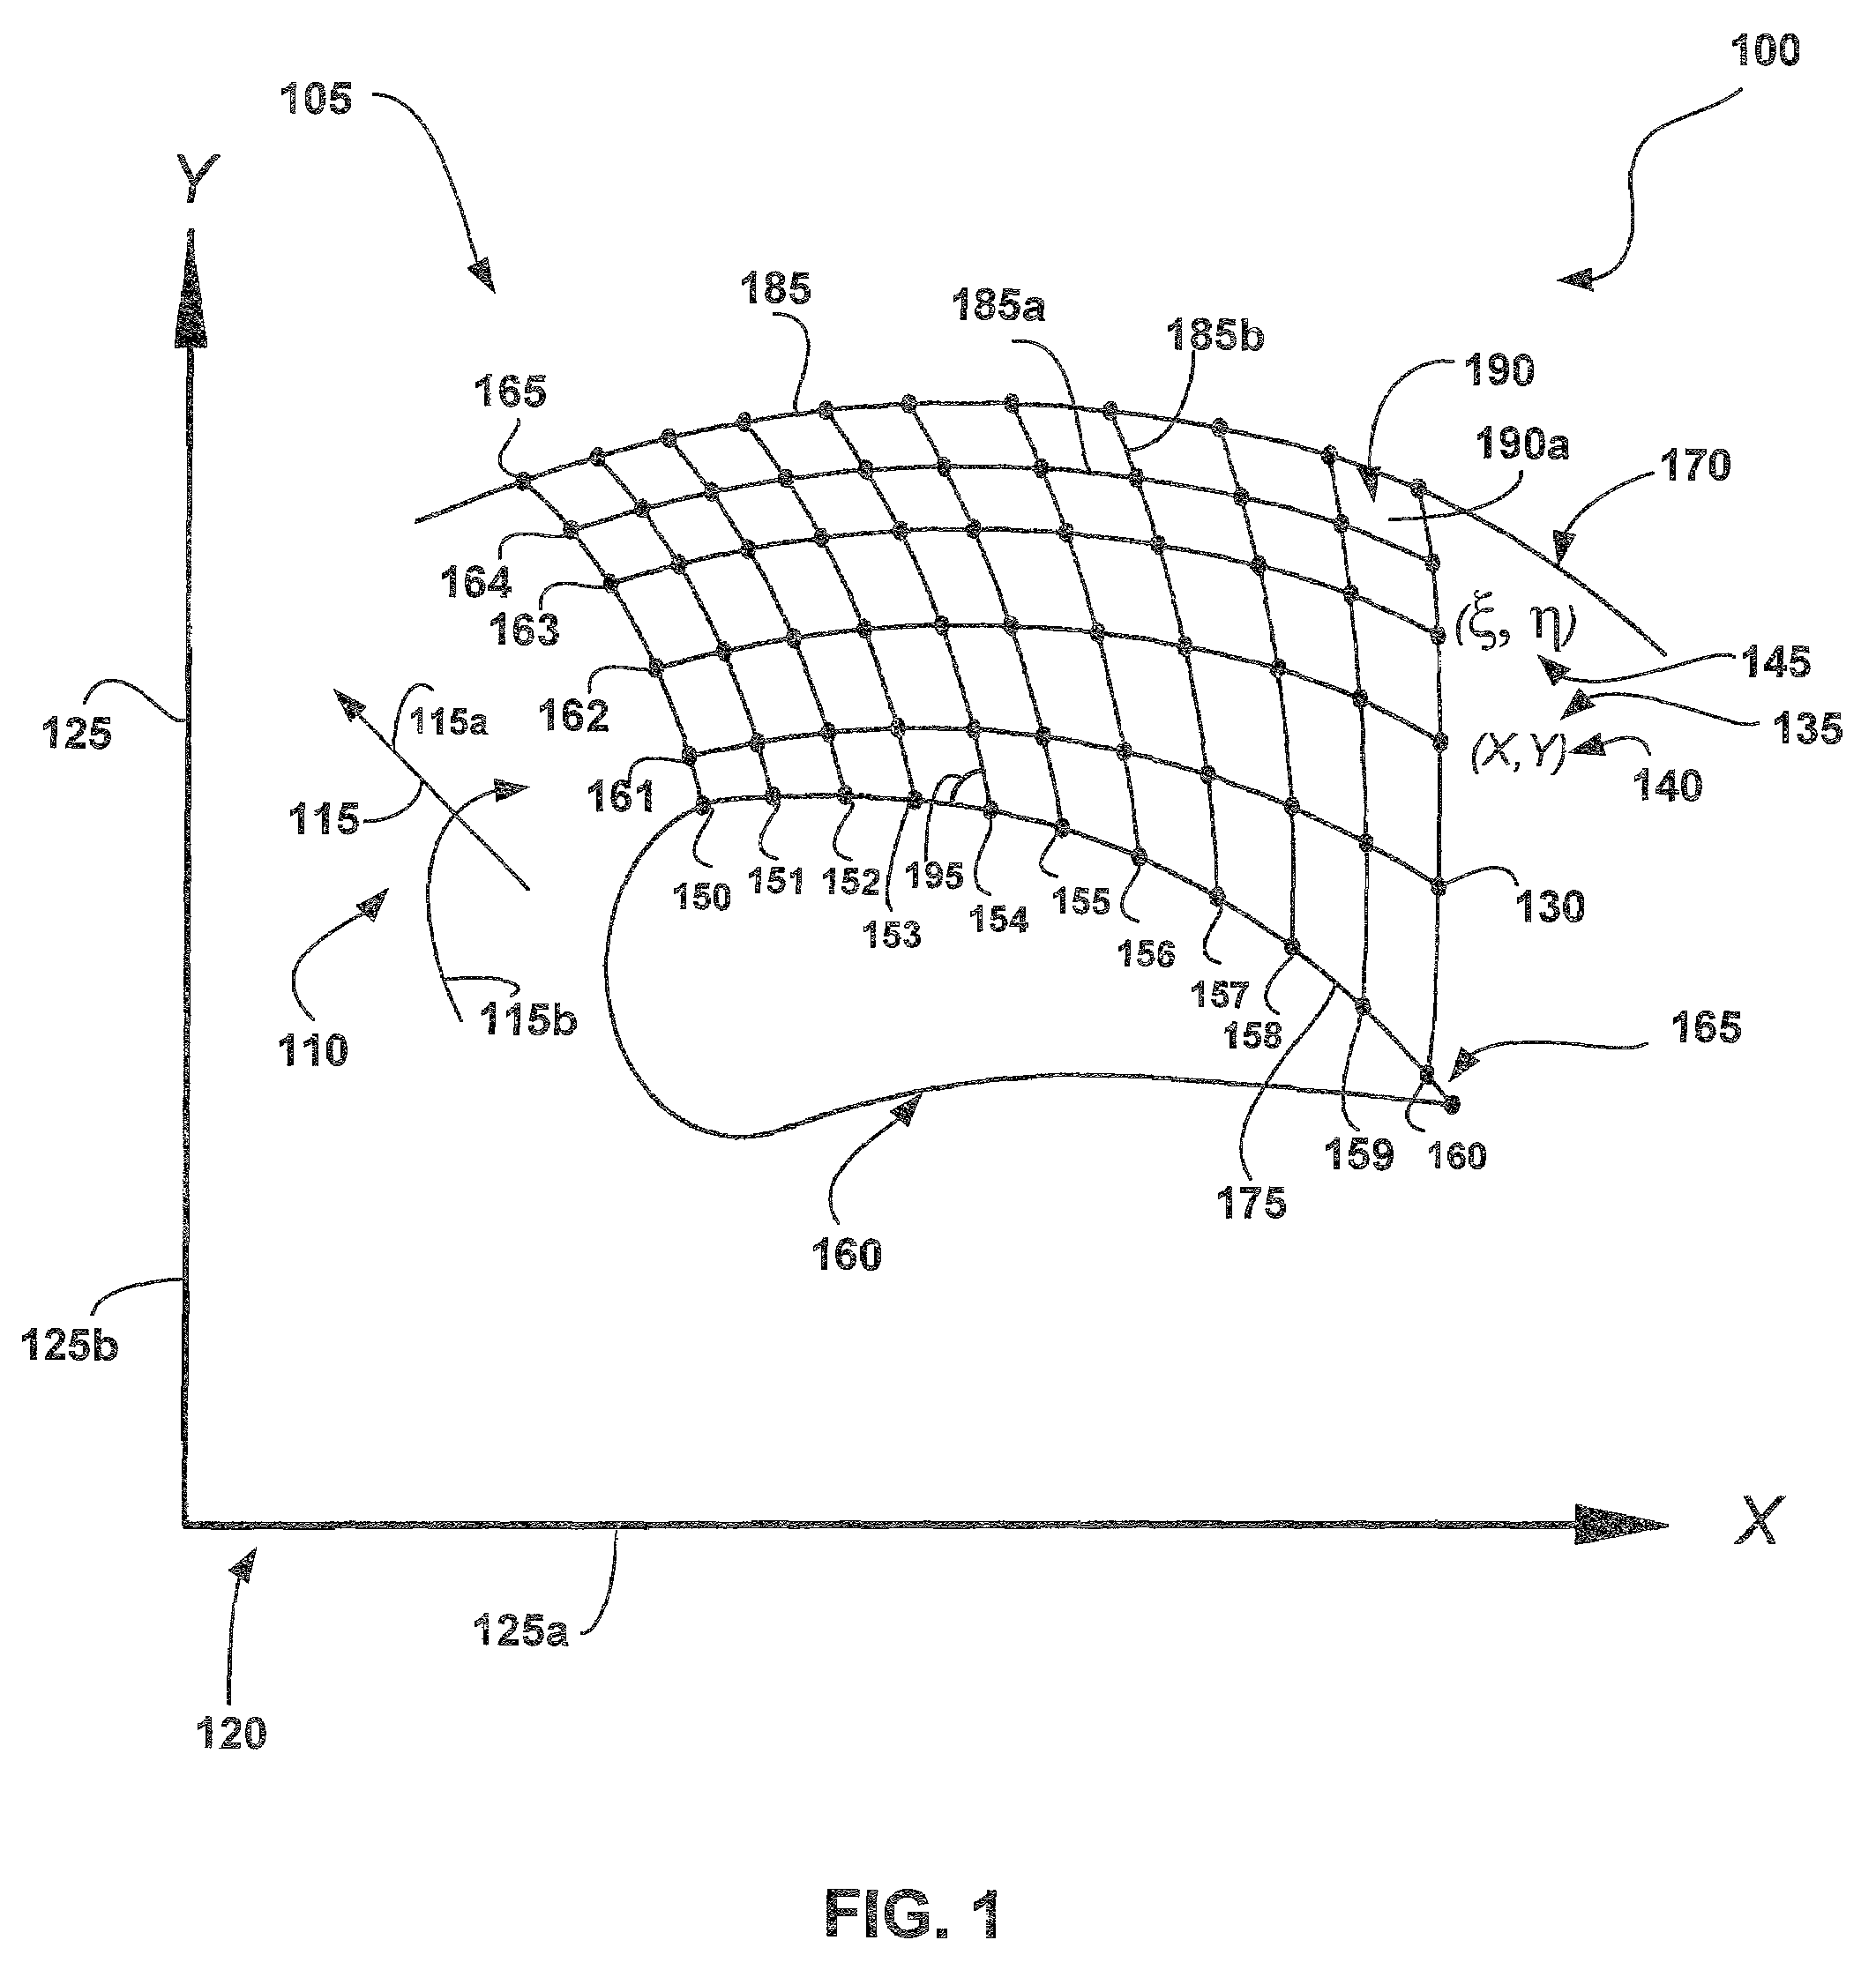 Source decay parameter system and method for automatic grid generation